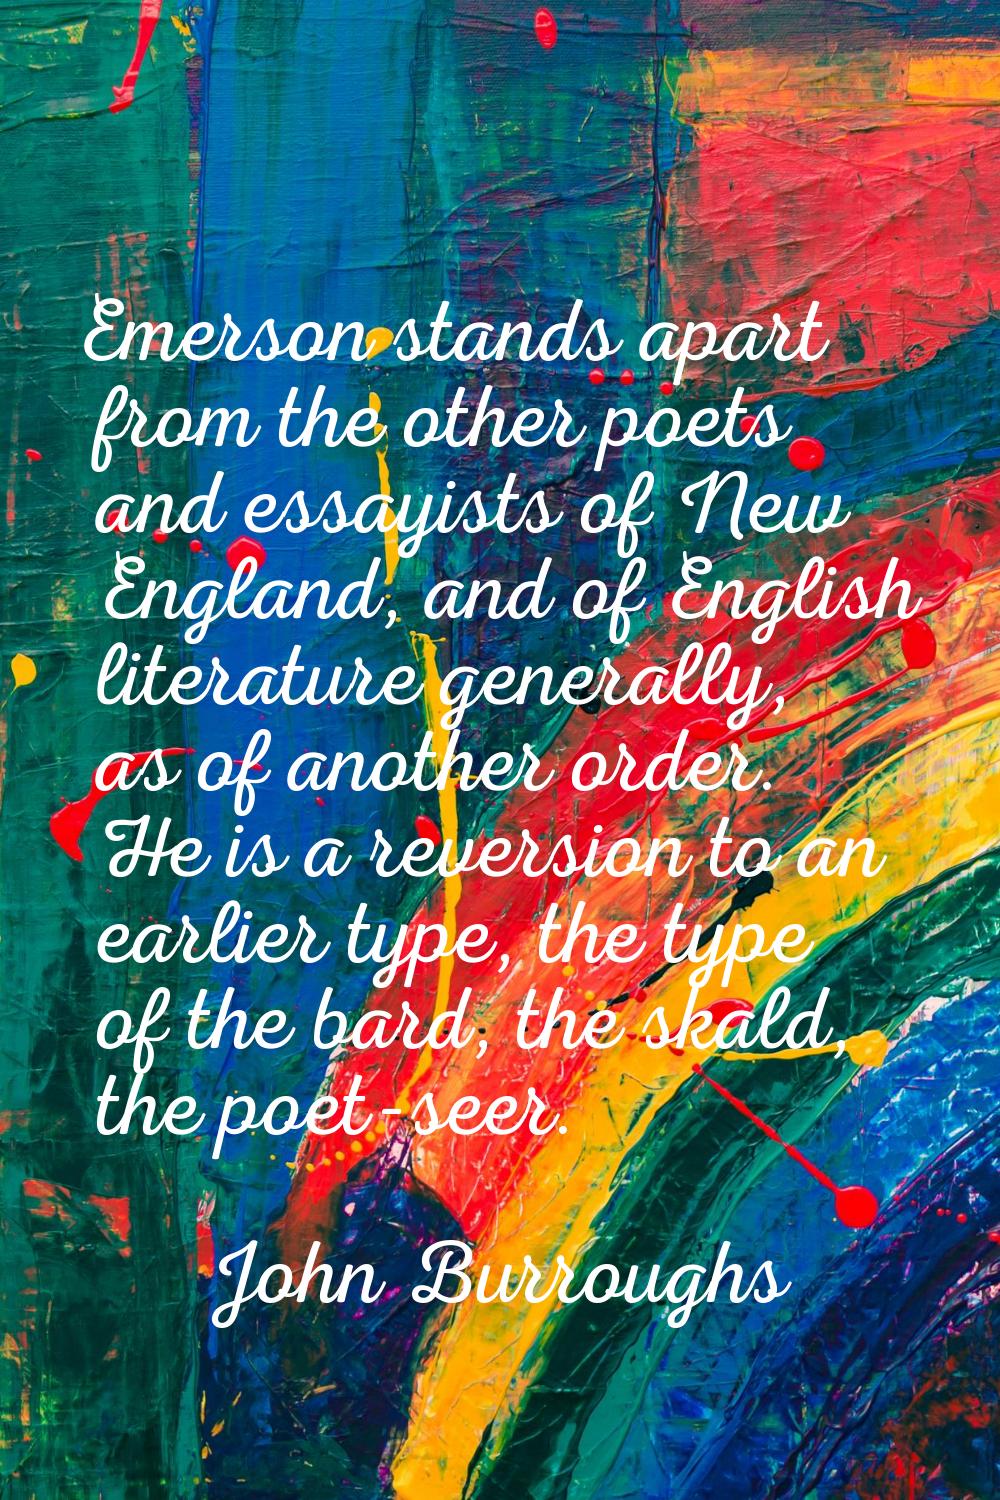 Emerson stands apart from the other poets and essayists of New England, and of English literature g